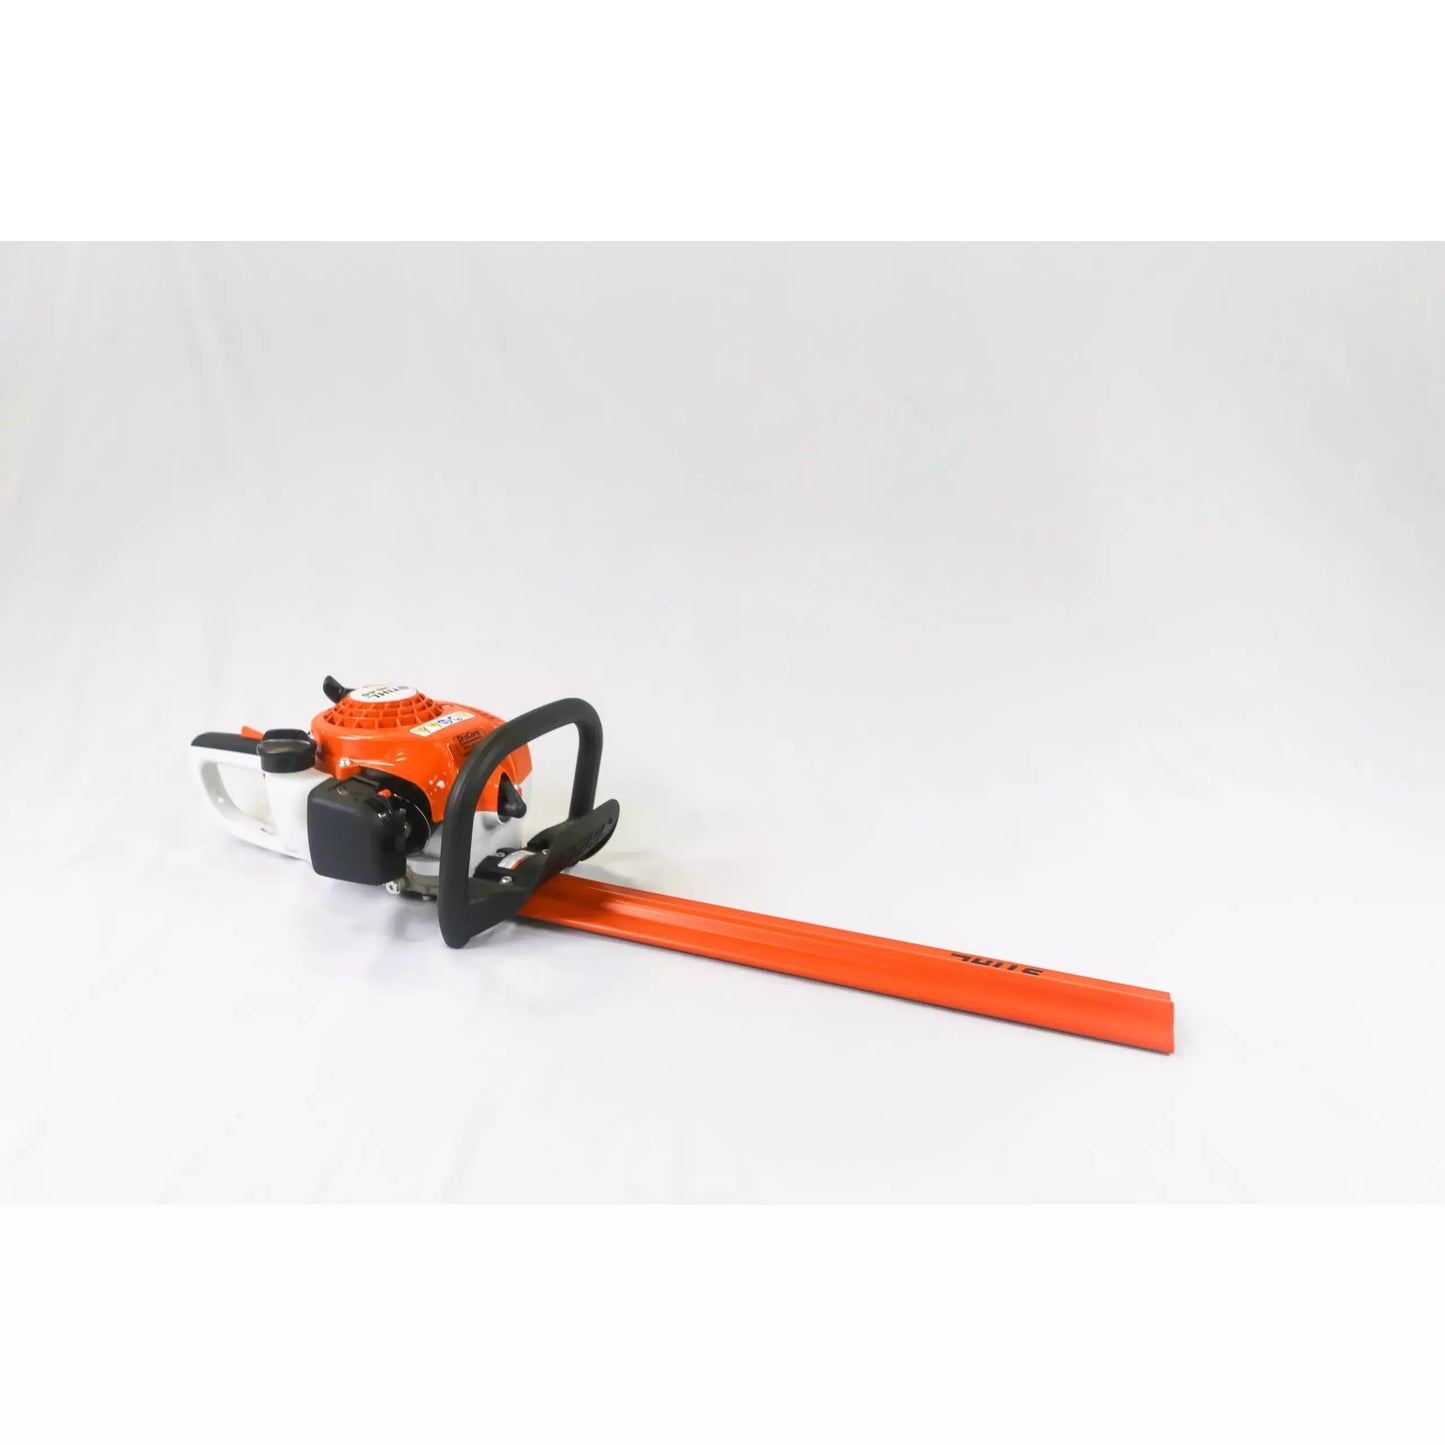 STIHL HS 45 18 in. Gas Hedge Trimmer